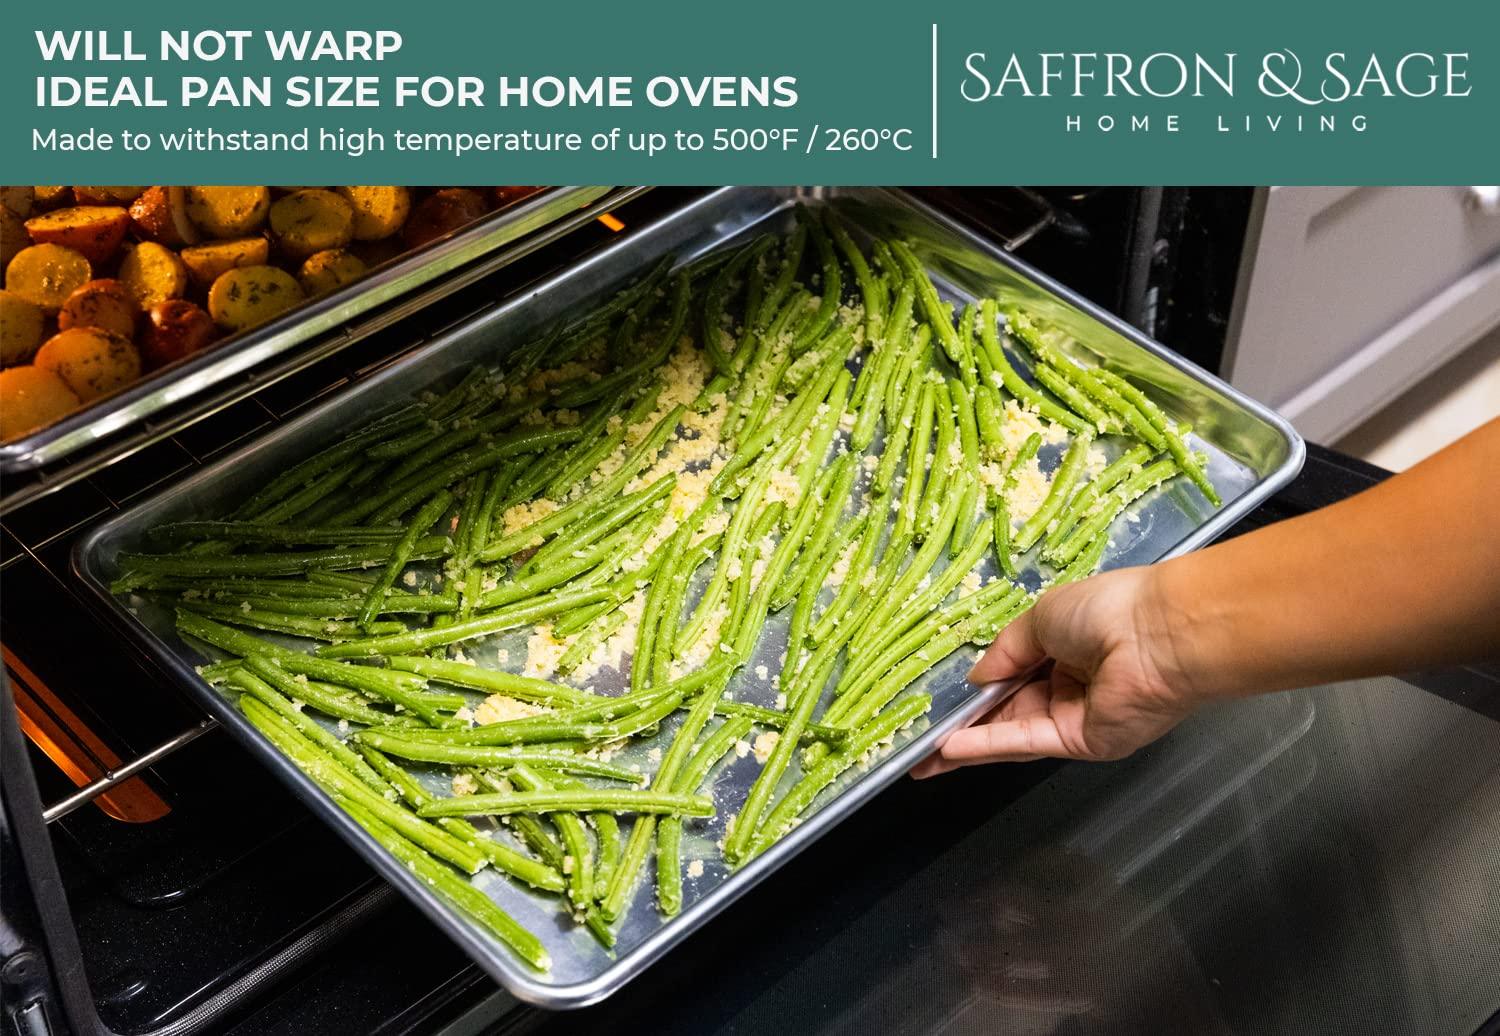 Commercial Quality Cookie Sheet Pan - 2 Pack Aluminum Half Sheet Baking Pan by Saffron & Sage Home Living - This 13x18 Baking Sheet Set is Rust & Warp Resistant, Heavy Duty, of Thick Gauge - CookCave